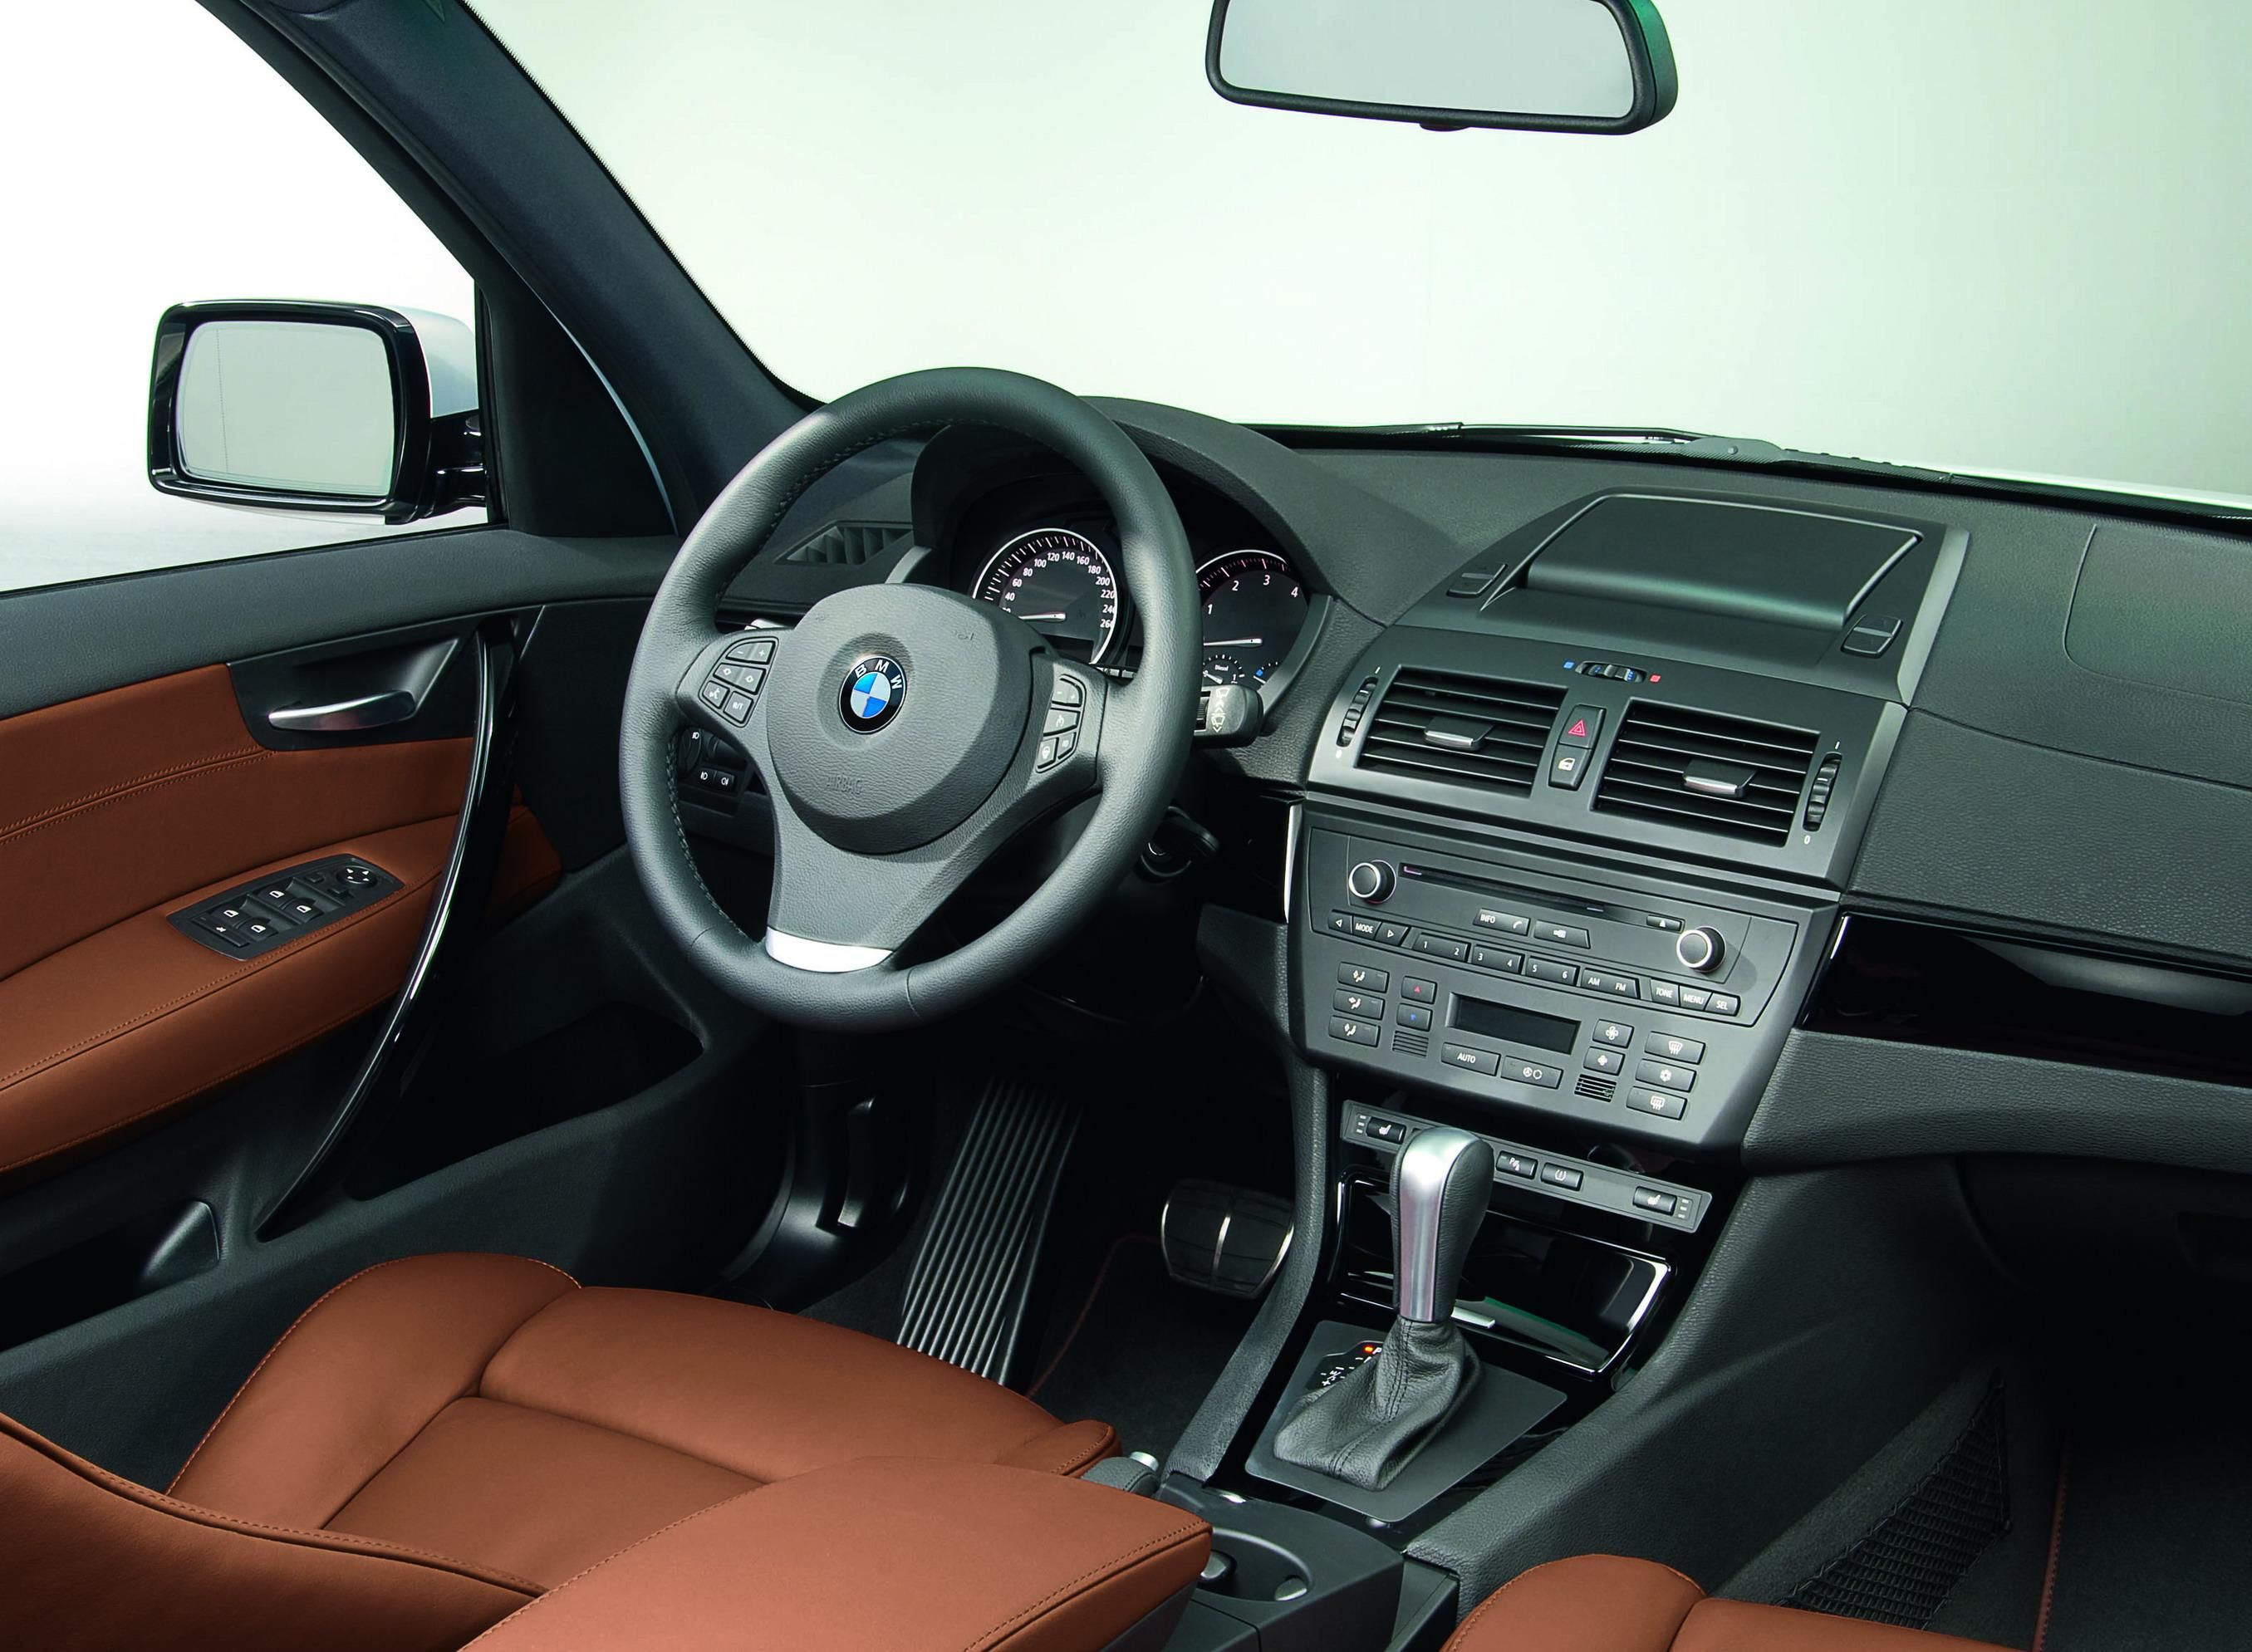 2009 BMW X3 Edition Exclusive and Lifestyle